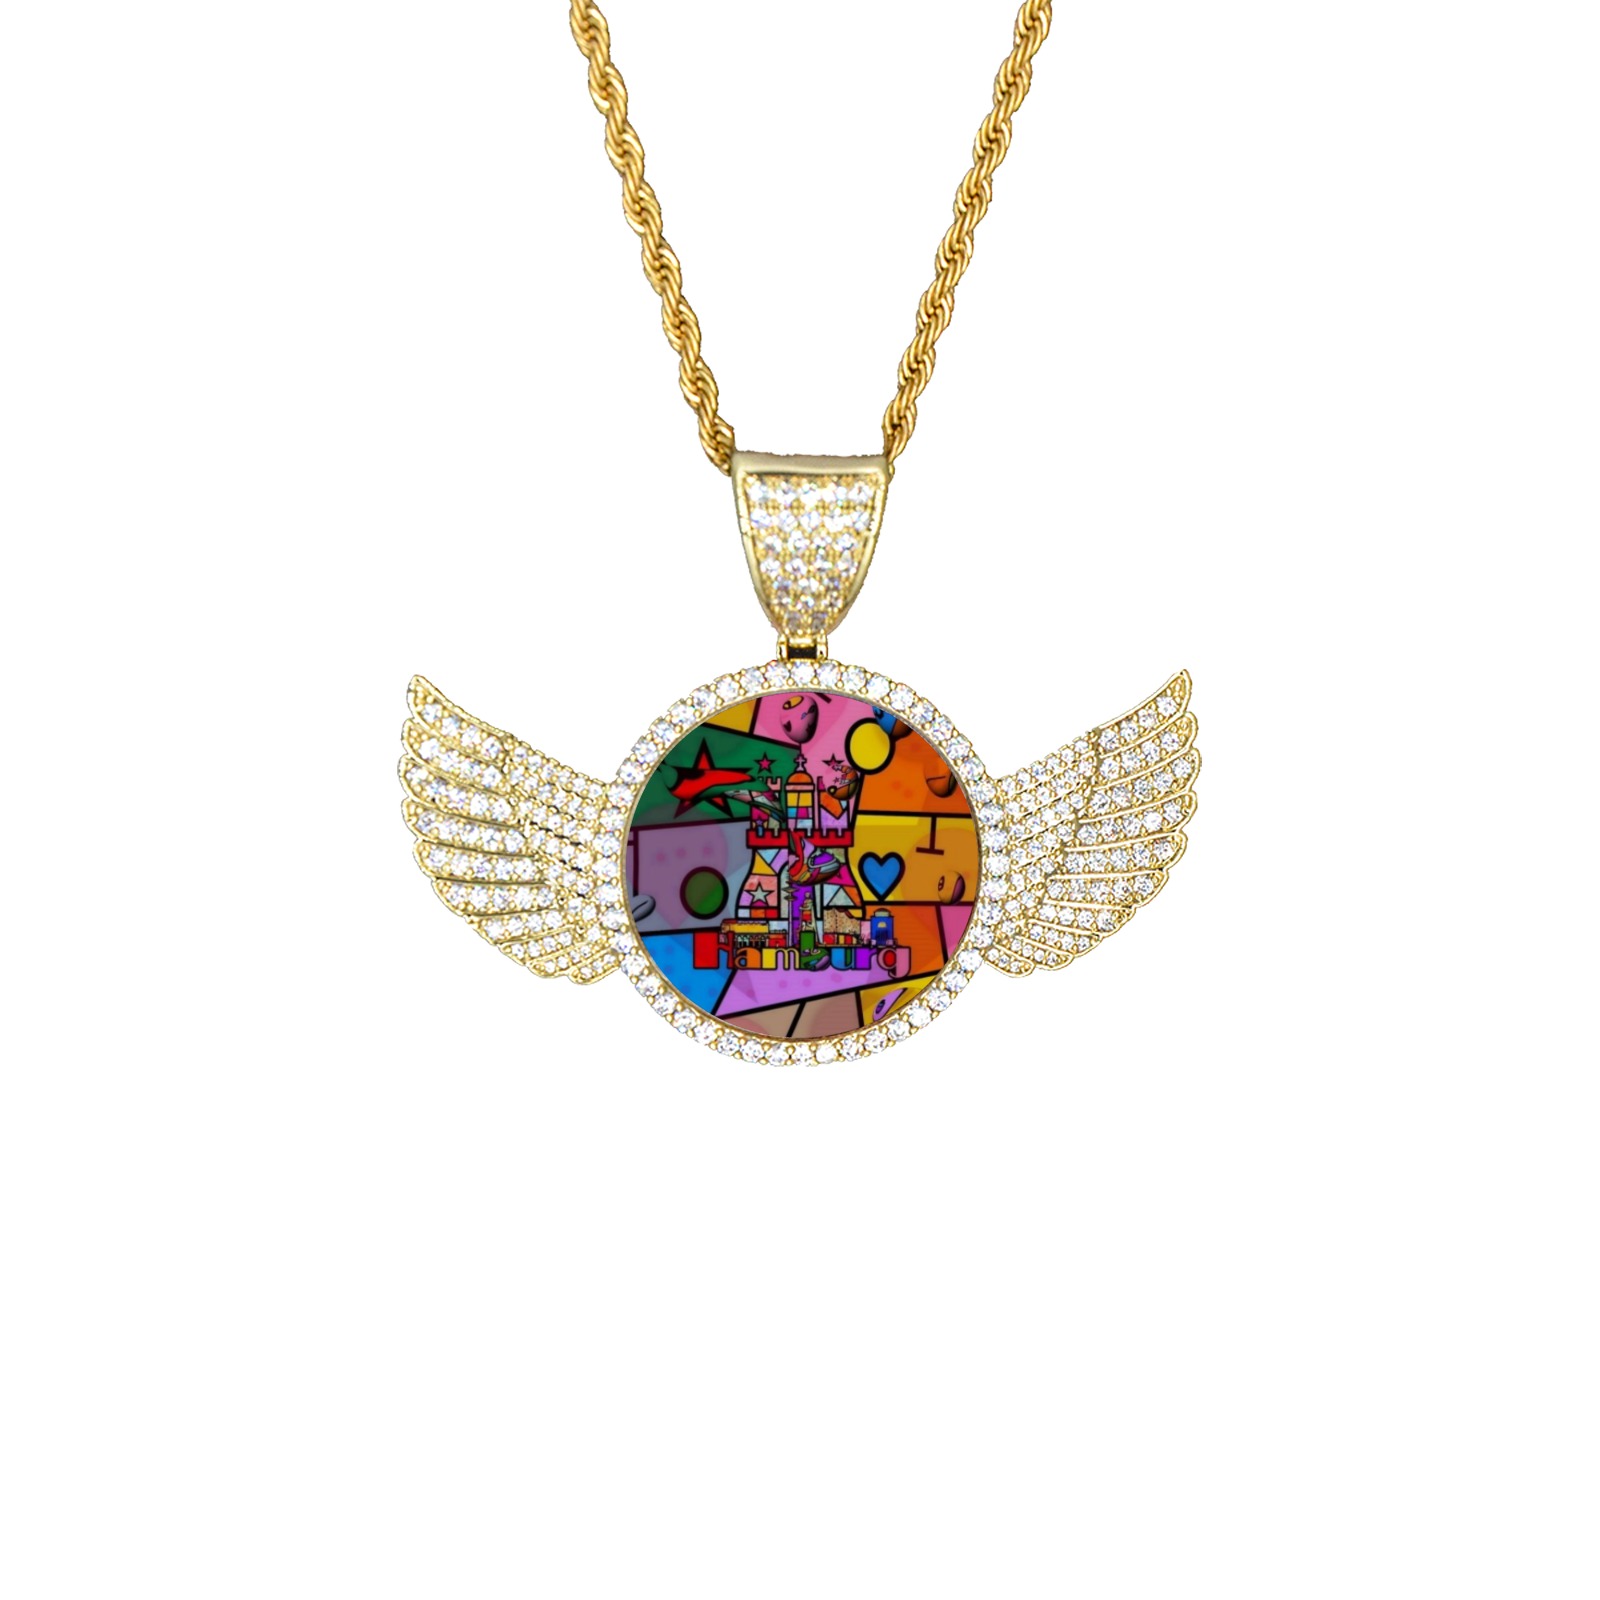 Hamburg by Nico Bielow Wings Gold Photo Pendant with Rope Chain